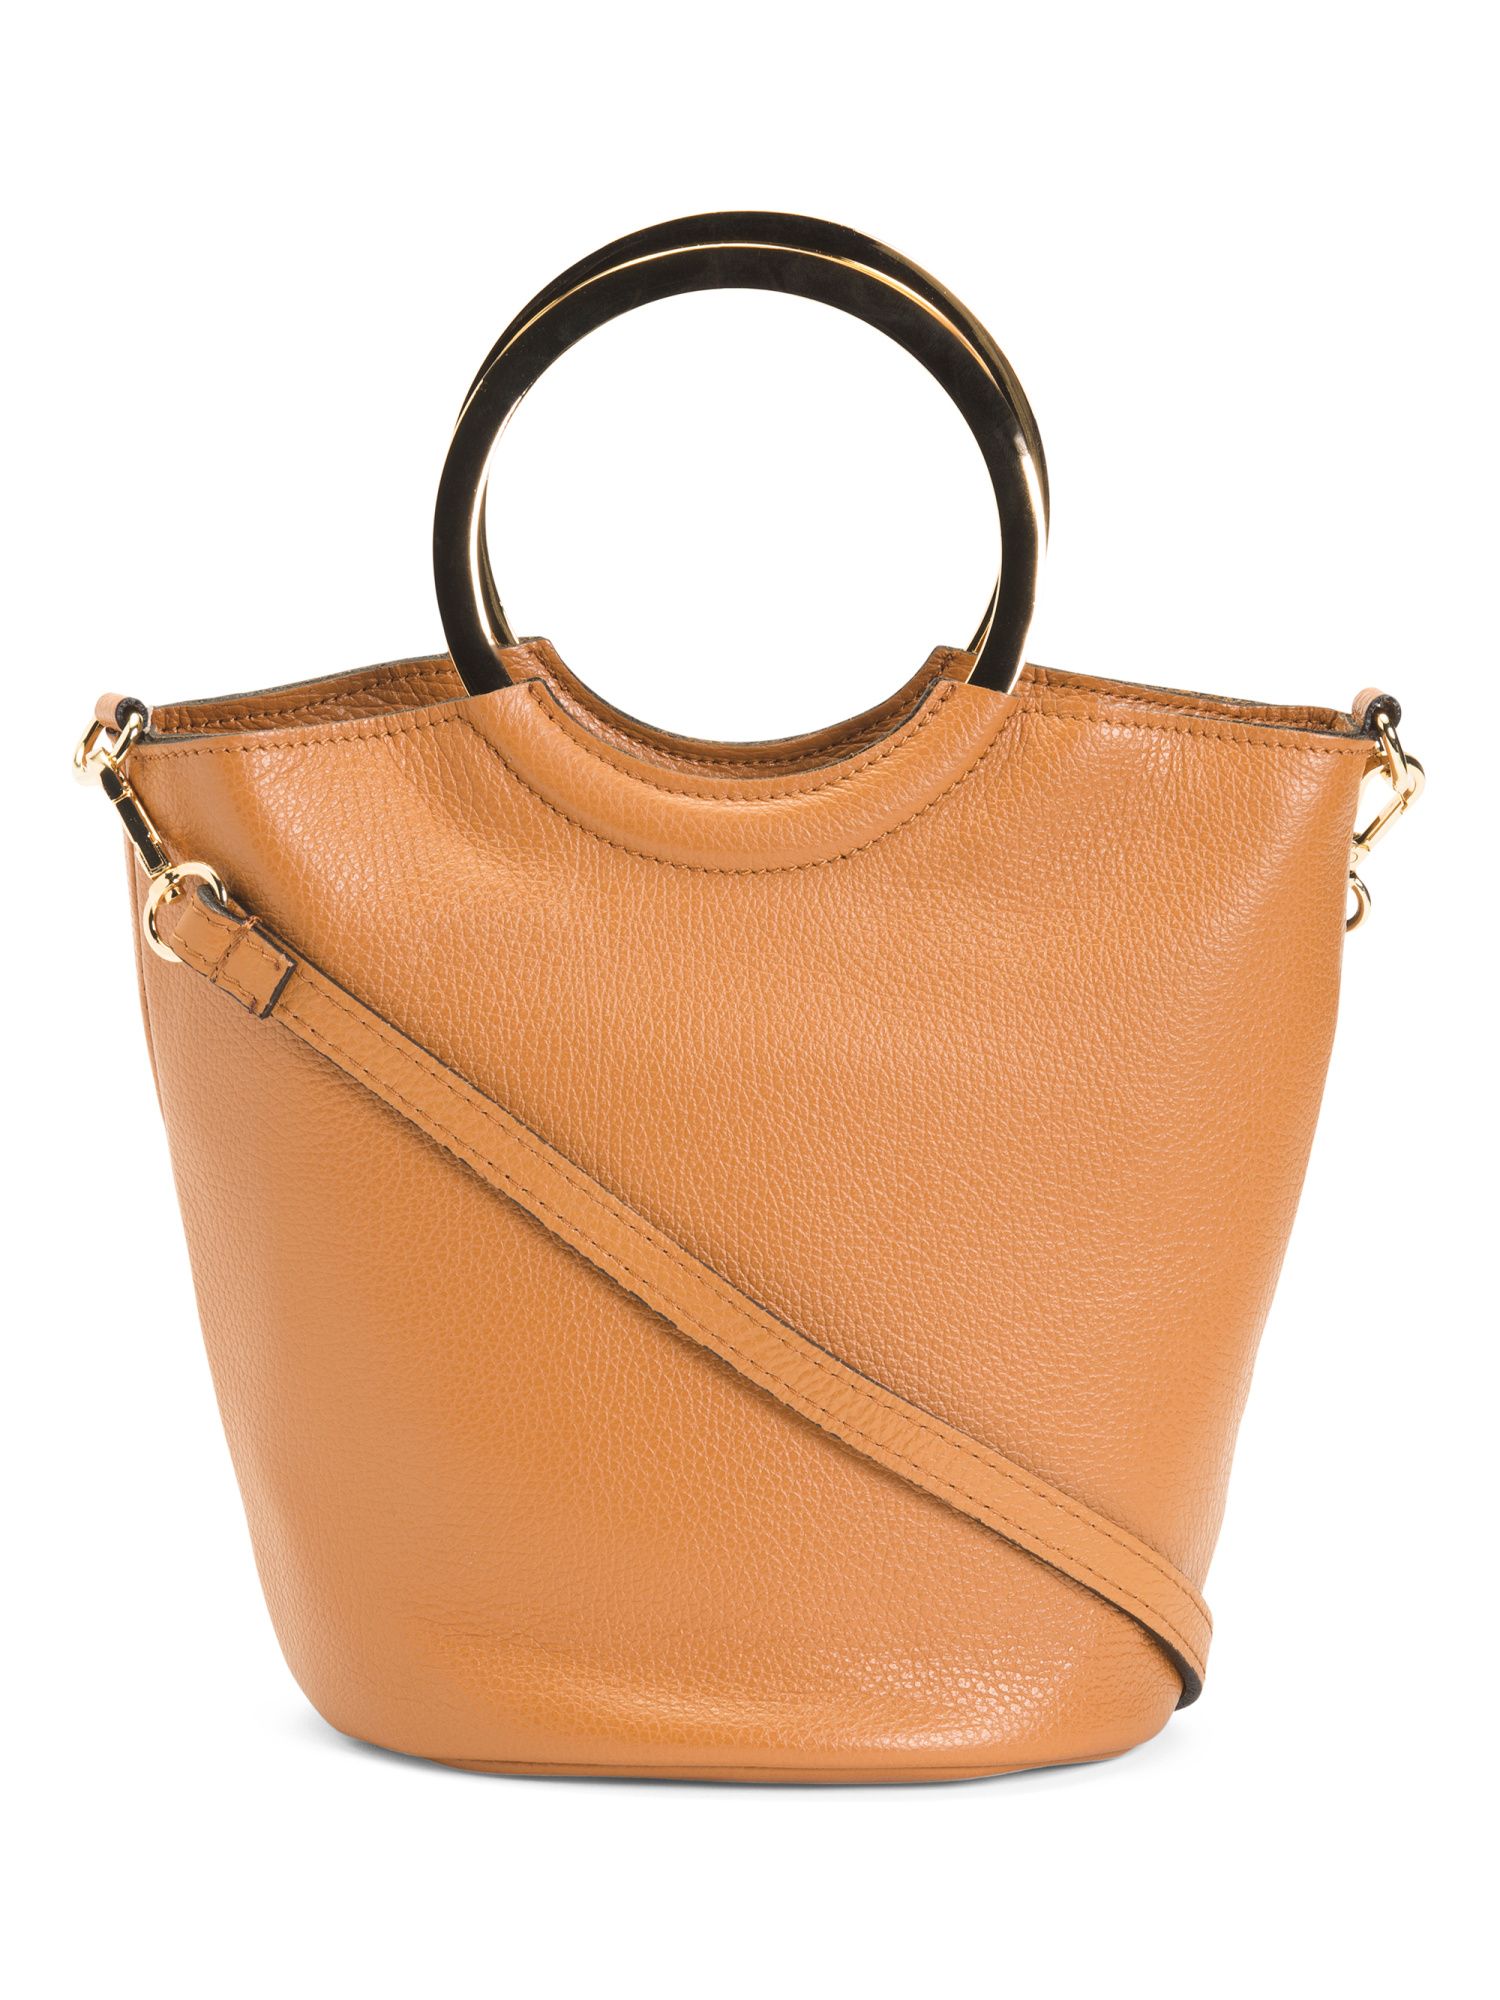 Made In Italy Leather Top Handle Small Tote With Crossbody Strap | Handbags | Marshalls | Marshalls